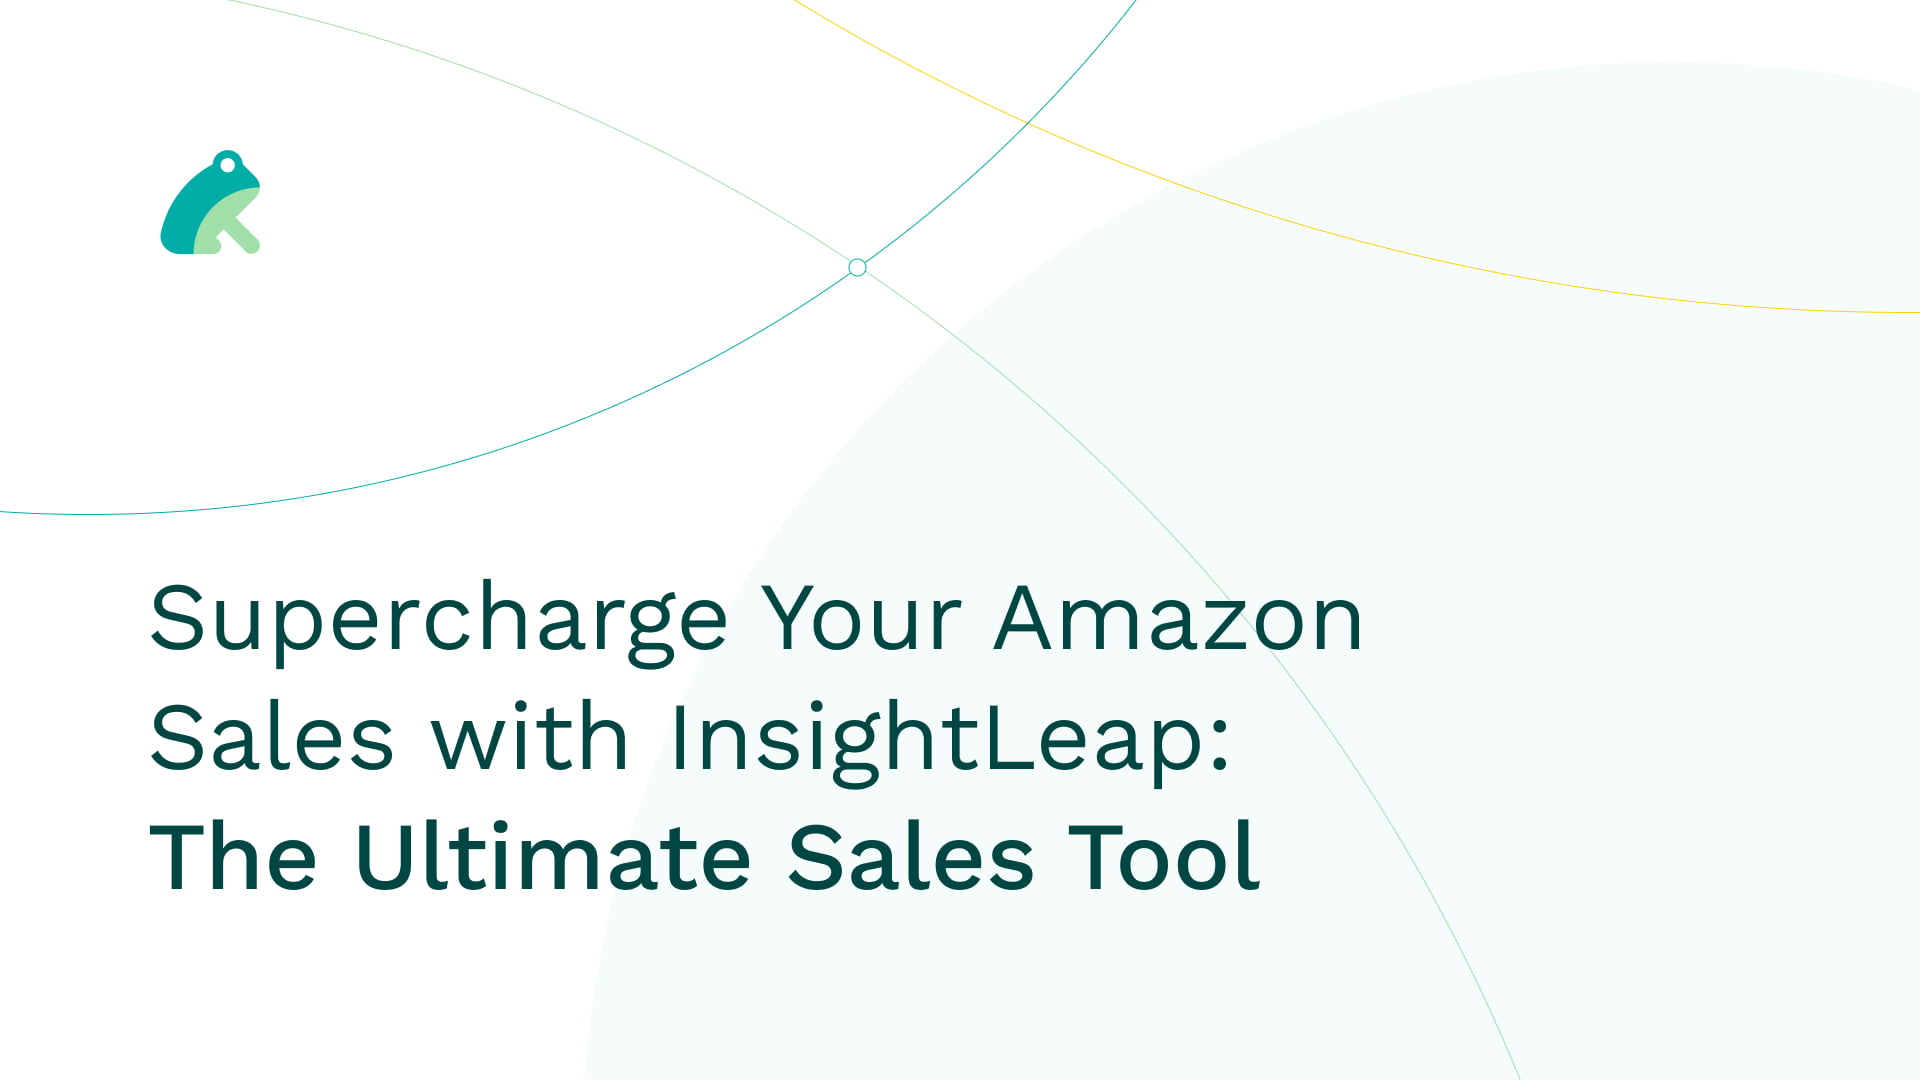 Supercharge Your Amazon Sales with InsightLeap: The Ultimate Sales Tool